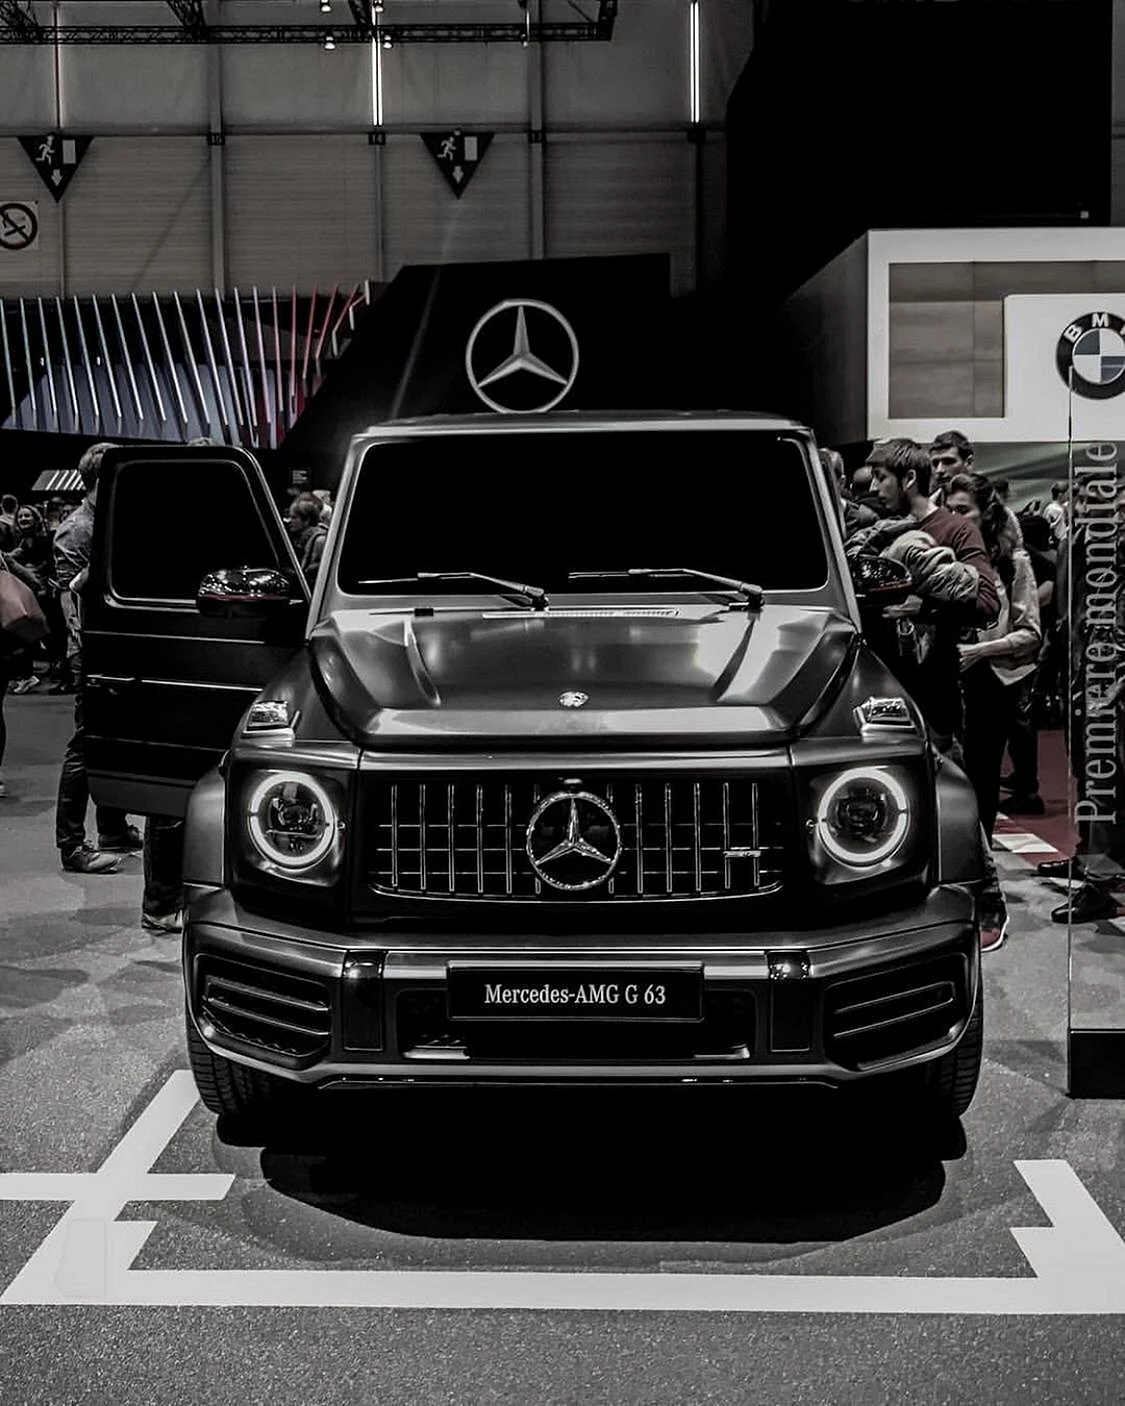 A Man With Mercedes G63 Wallpaper For iPhone